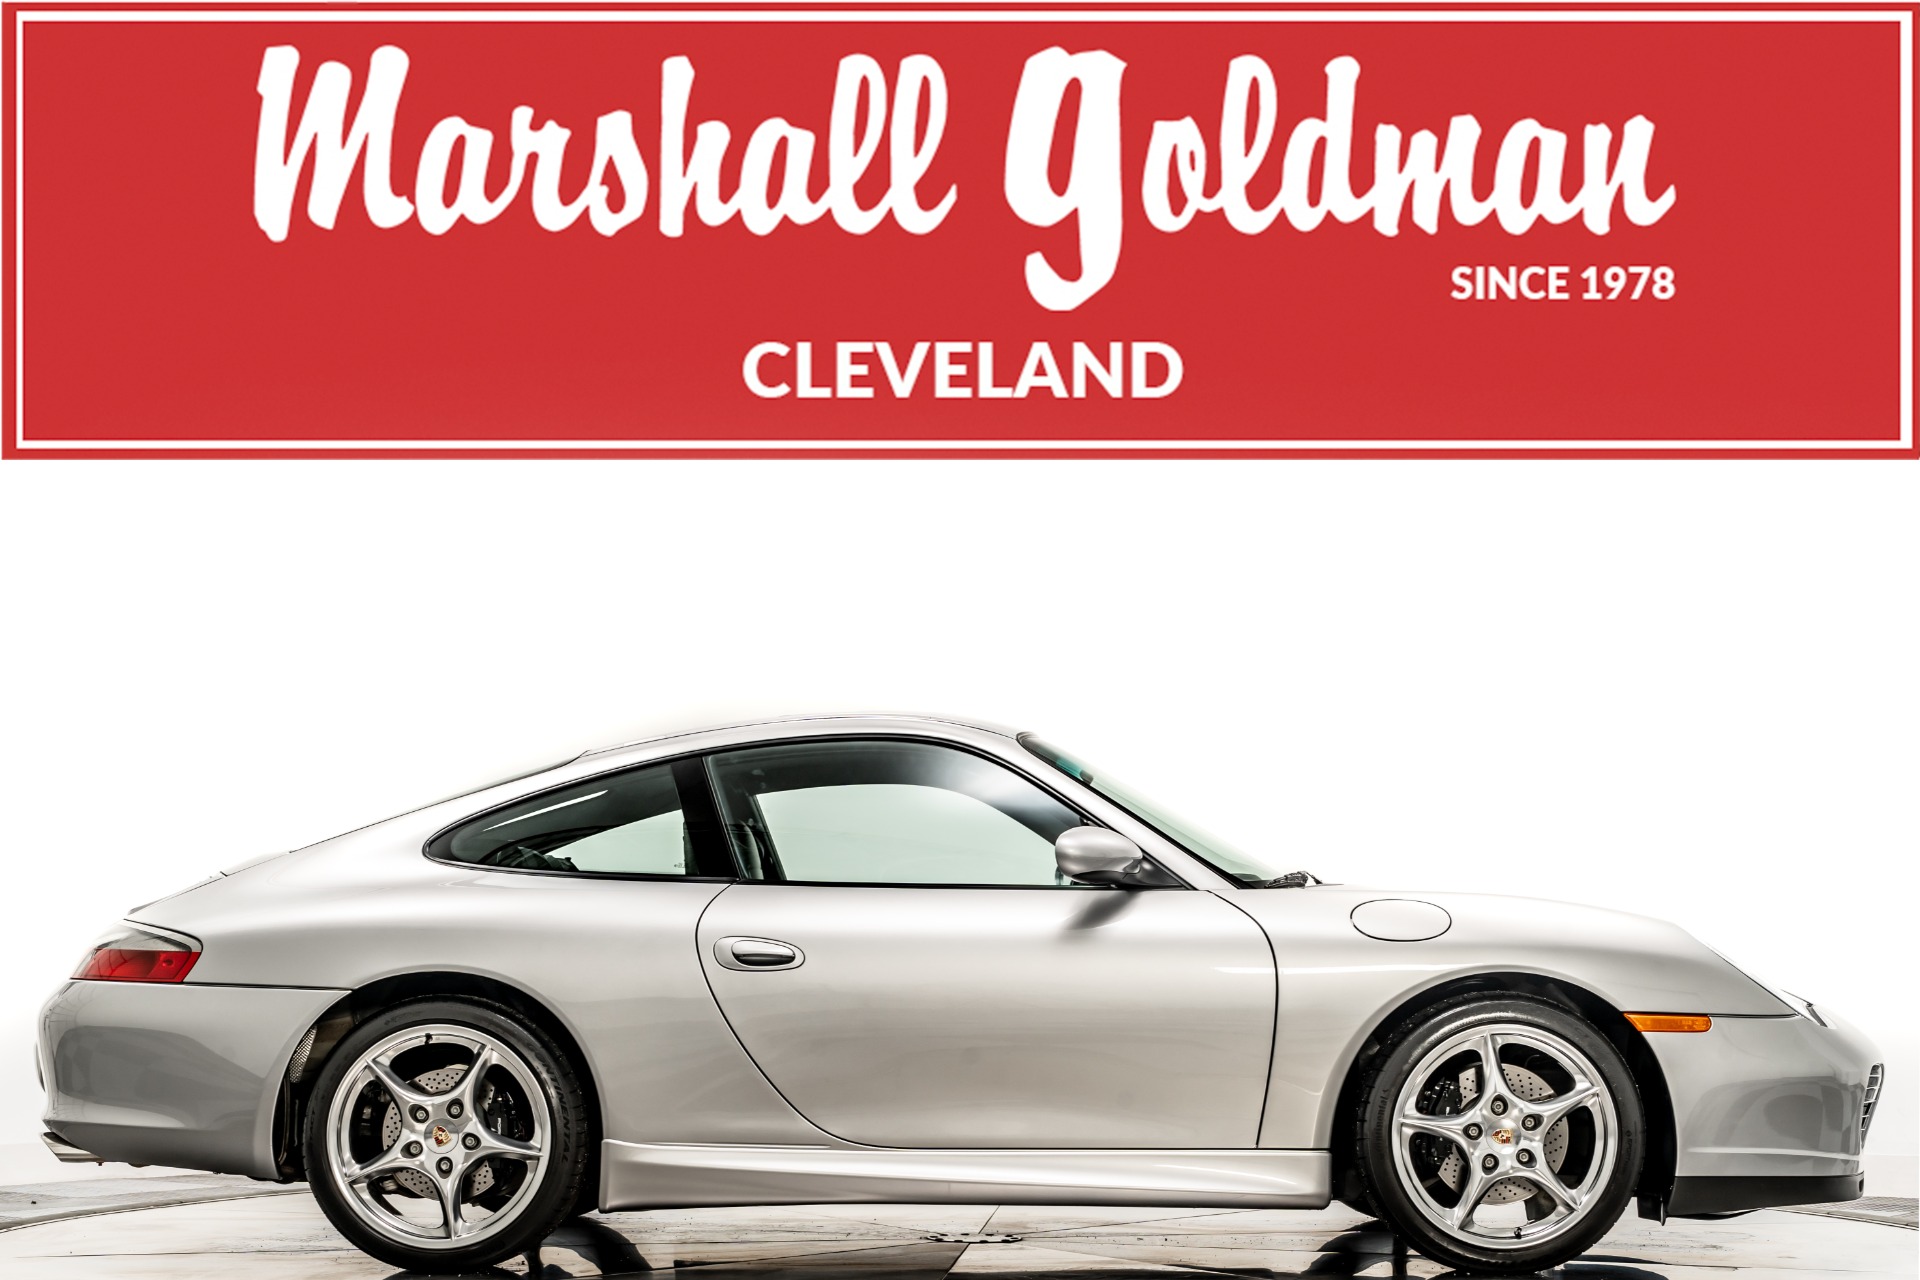 Used 2004 Porsche 911 Carrera 40th Anniversary Edition For Sale (Sold) |  Marshall Goldman Motor Sales Stock #W40JAHRE911